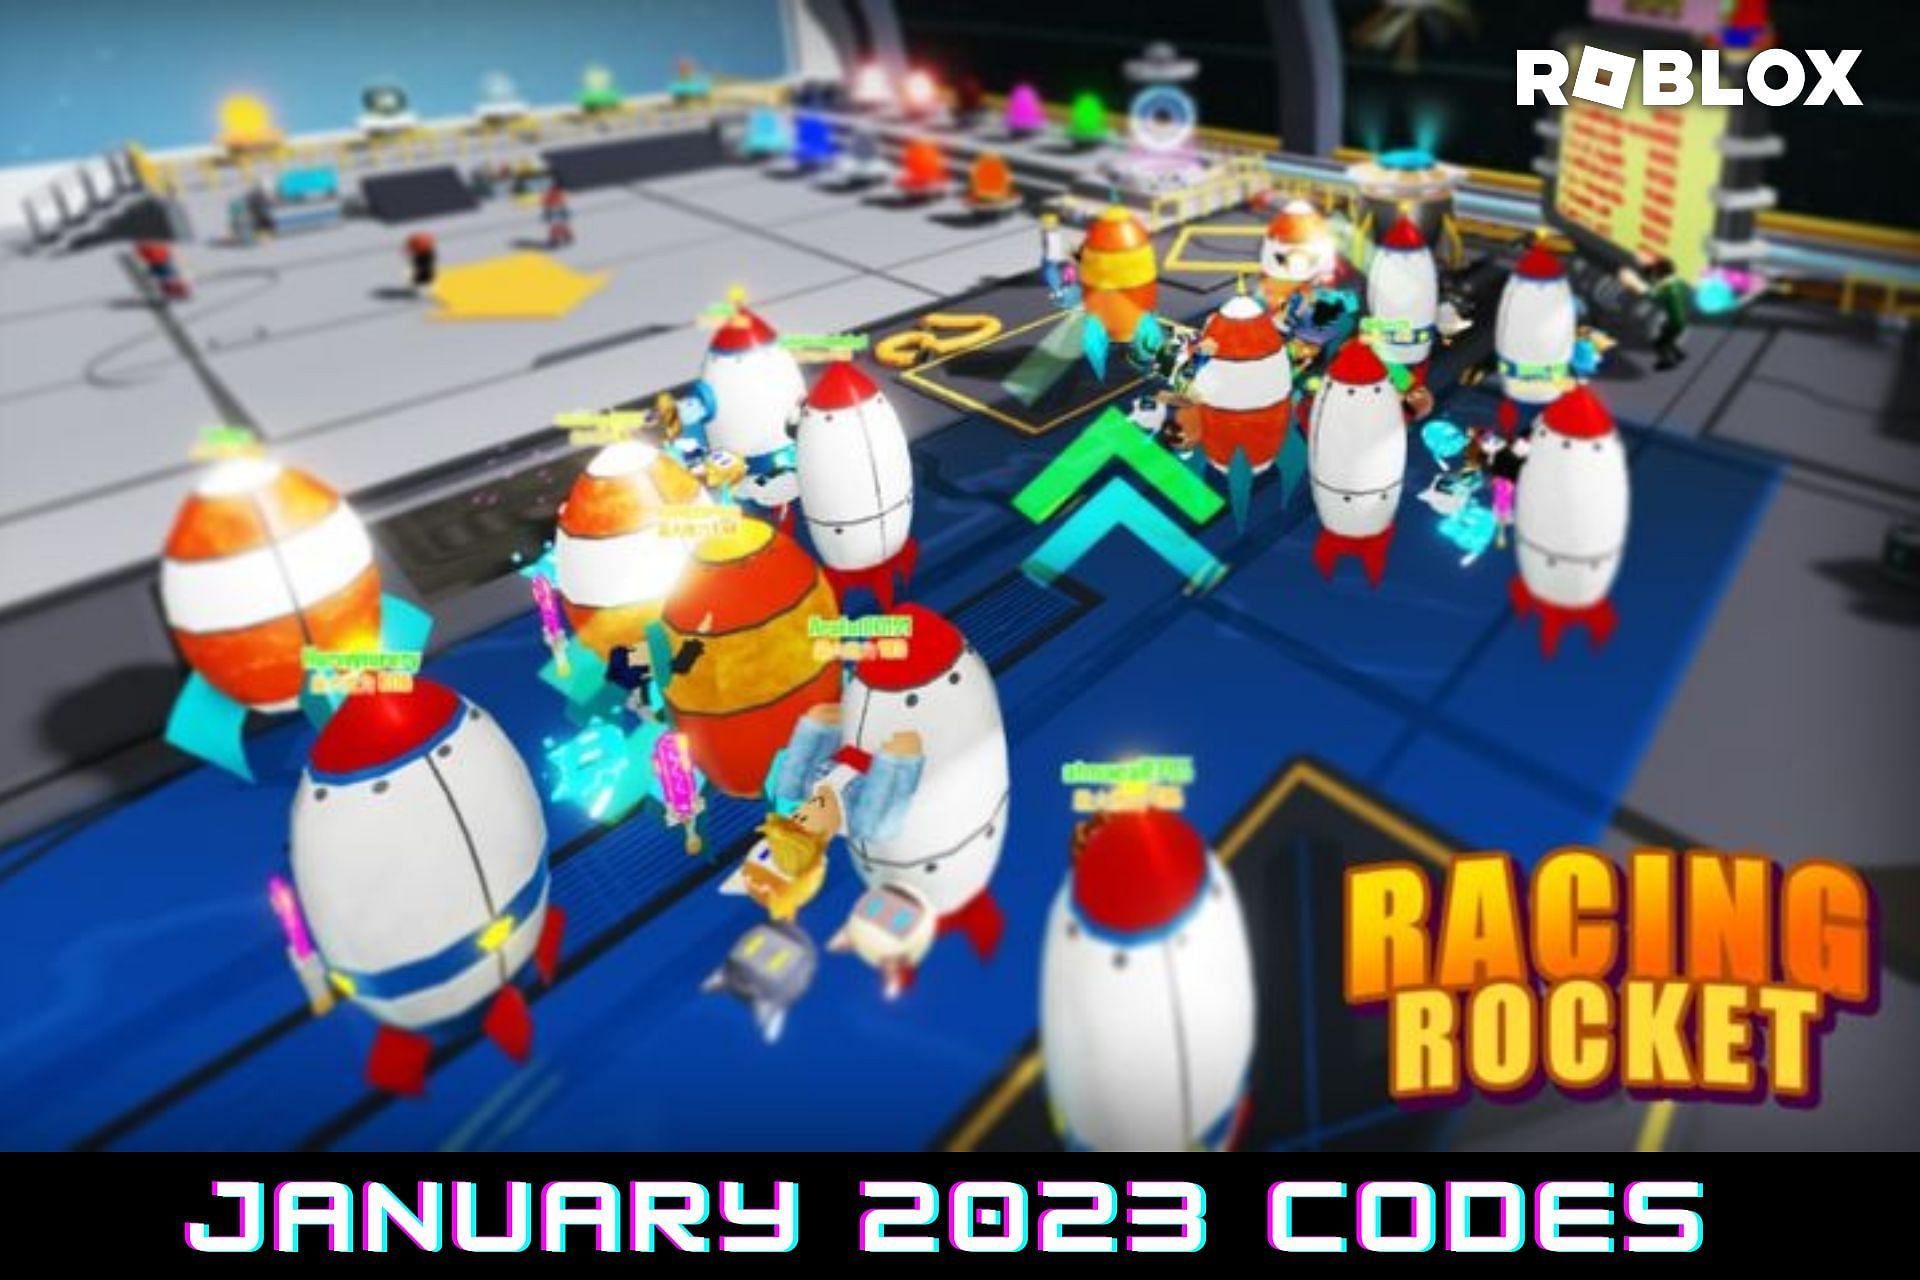 Roblox Racing Rocket Codes for January 2023 stars, boosts, and more